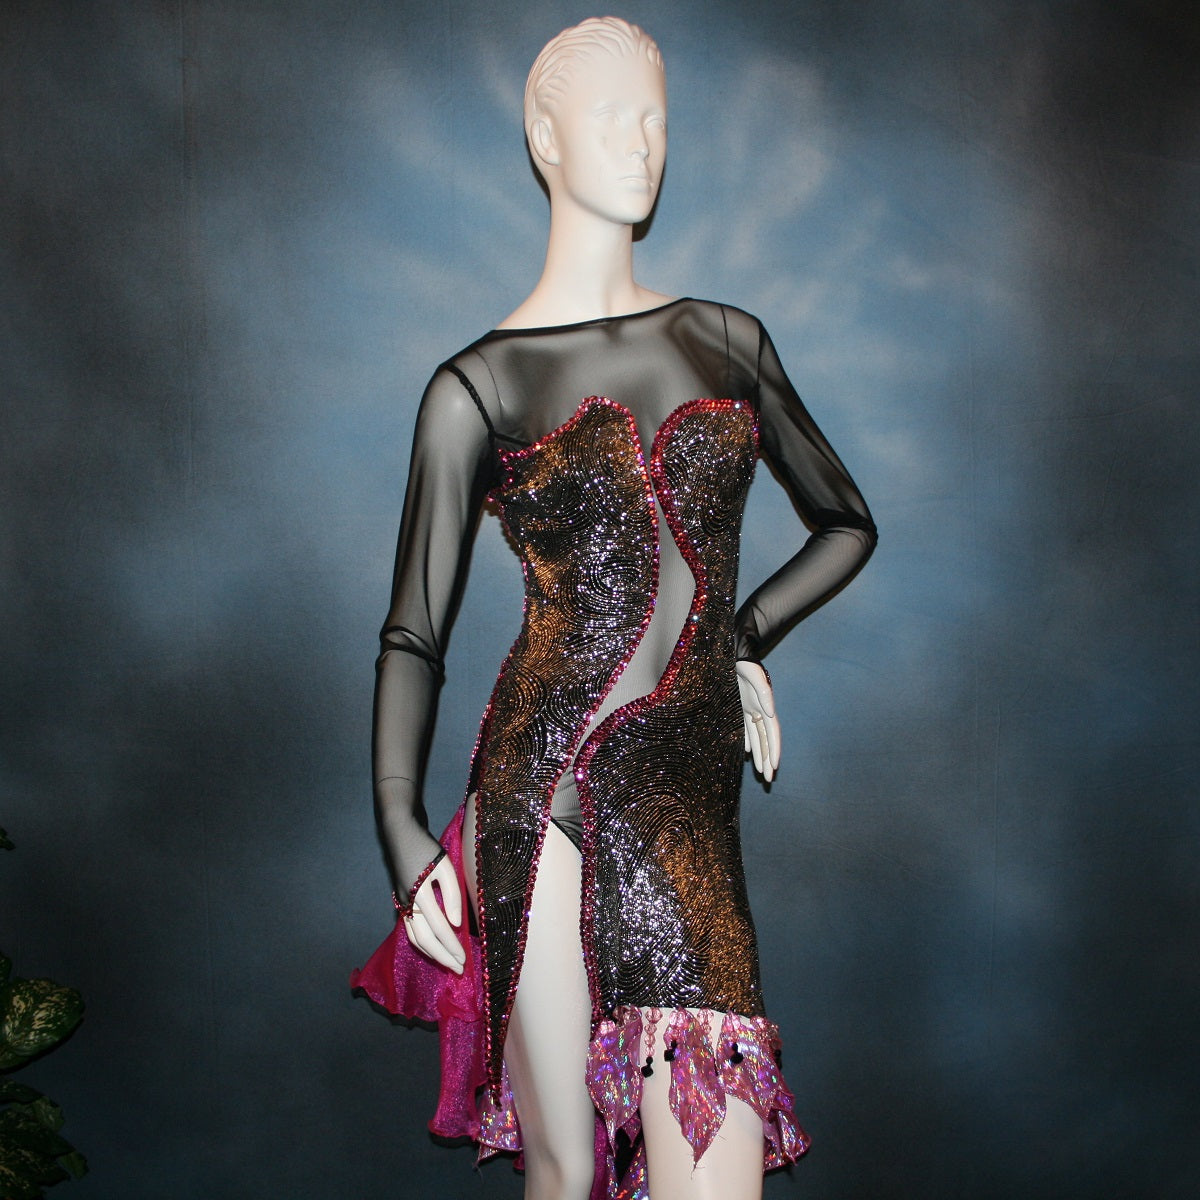 Crystal's Creations close up view of Black & silver Latin/rhythm dress with pink accents created of gorgeous silver swirls on black glitter slinky on a sheer stretch mesh base, embellished with pink Swarovski rhinestone work & hand beading